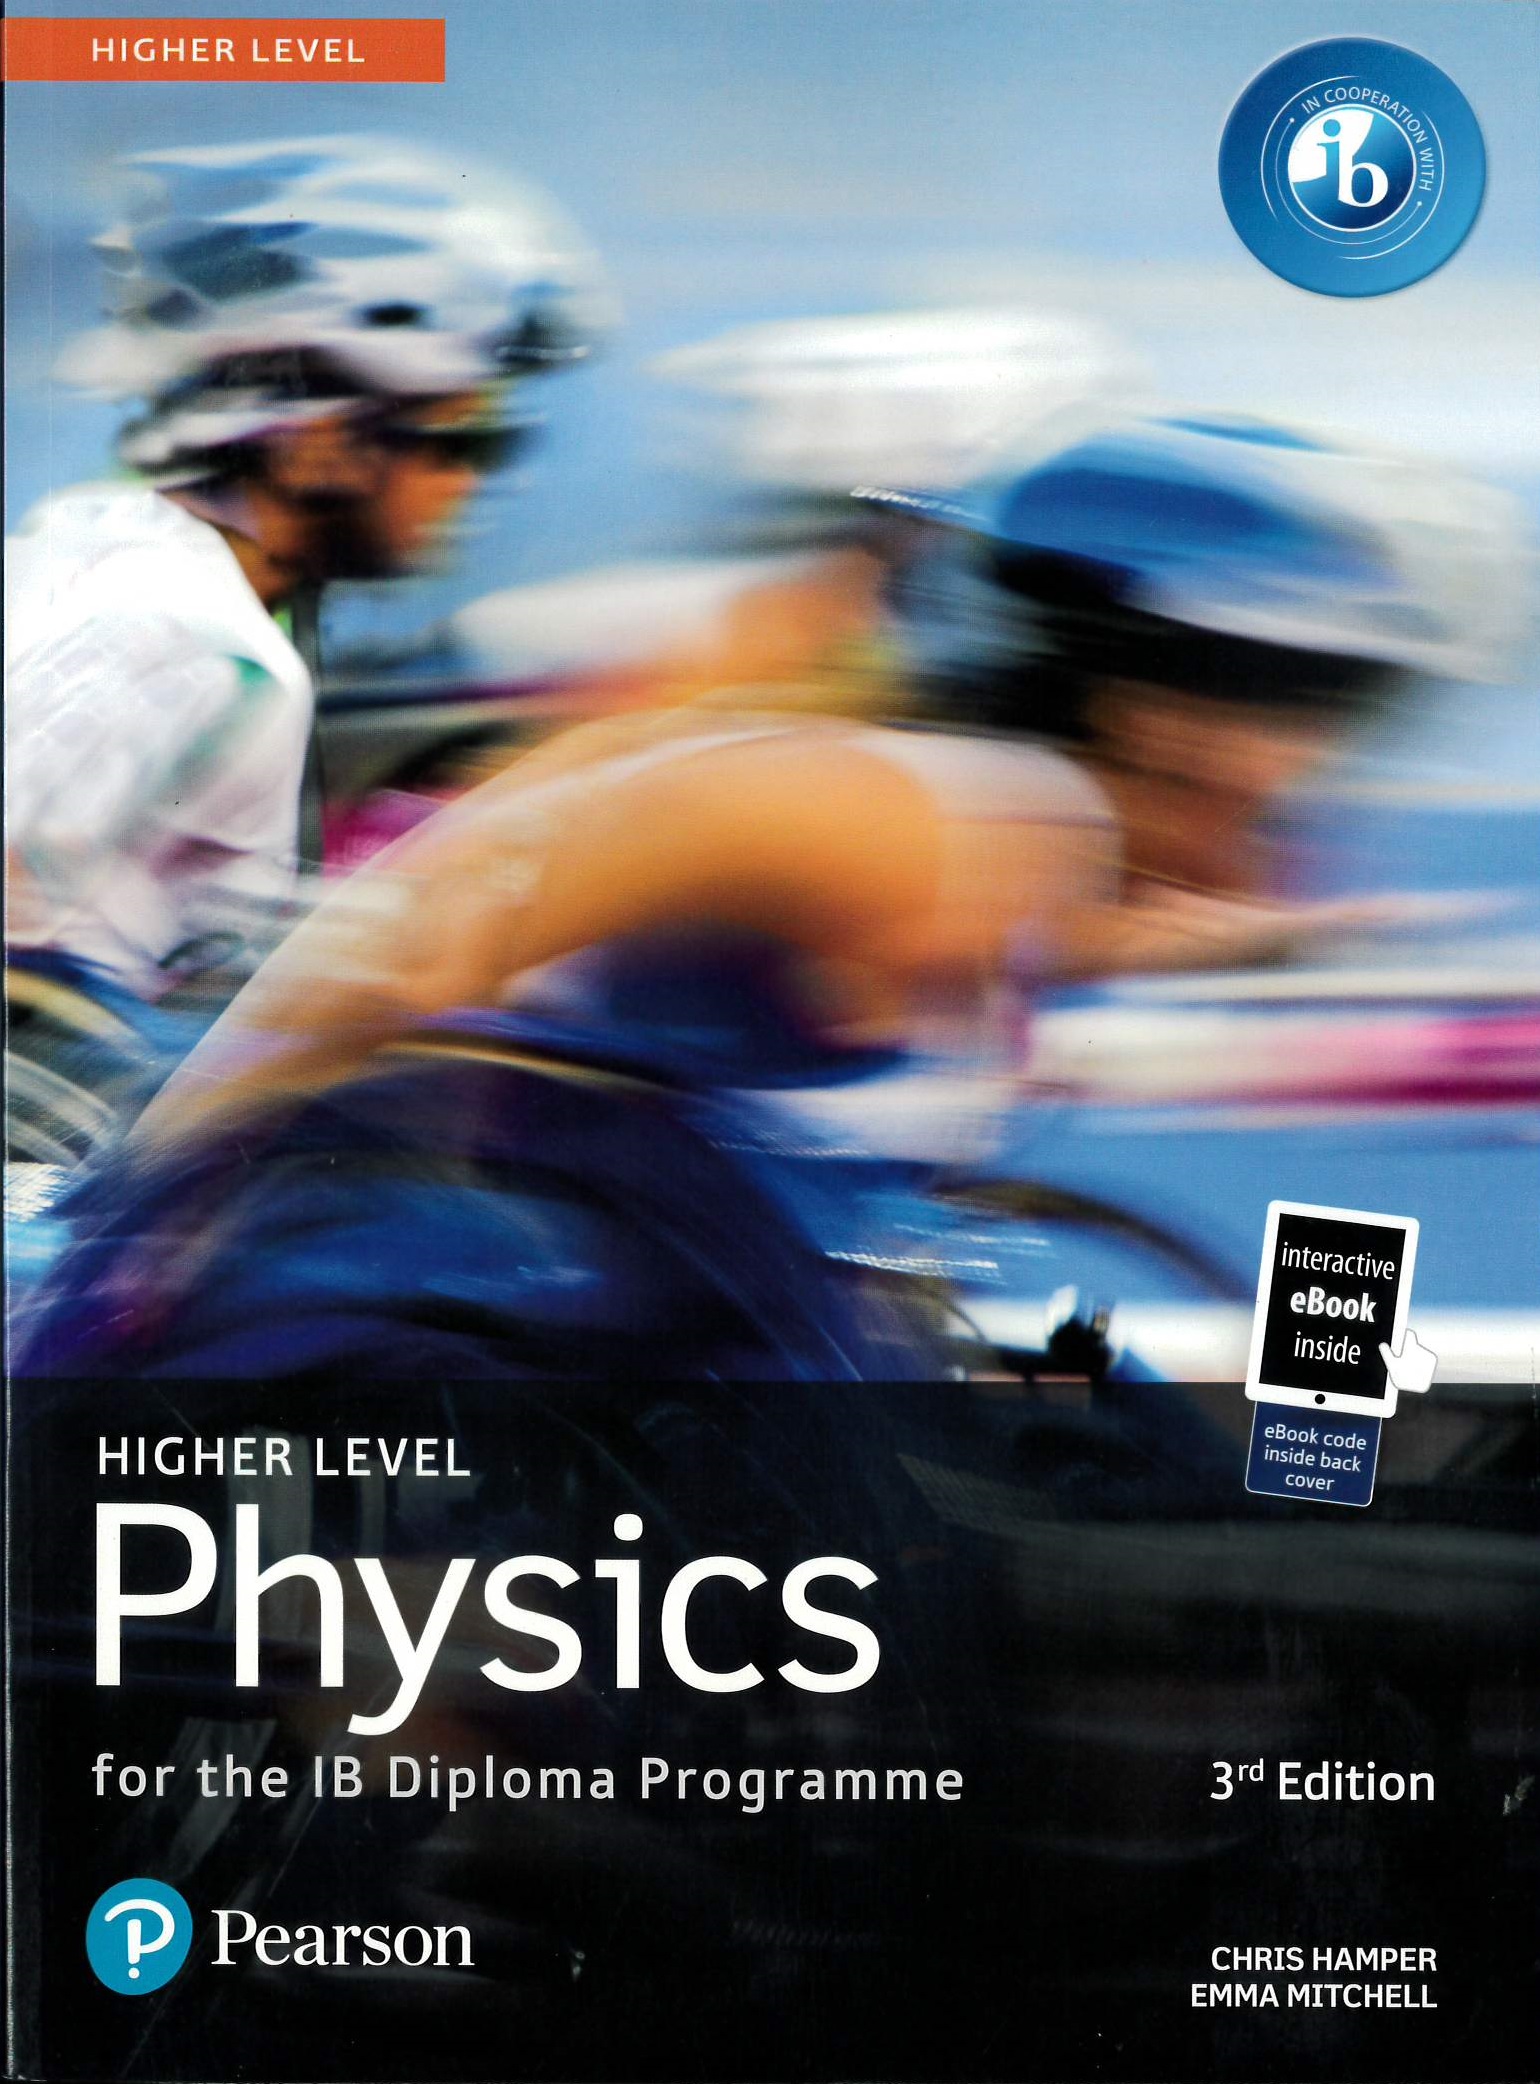 Higher level physics for the IB diploma programme